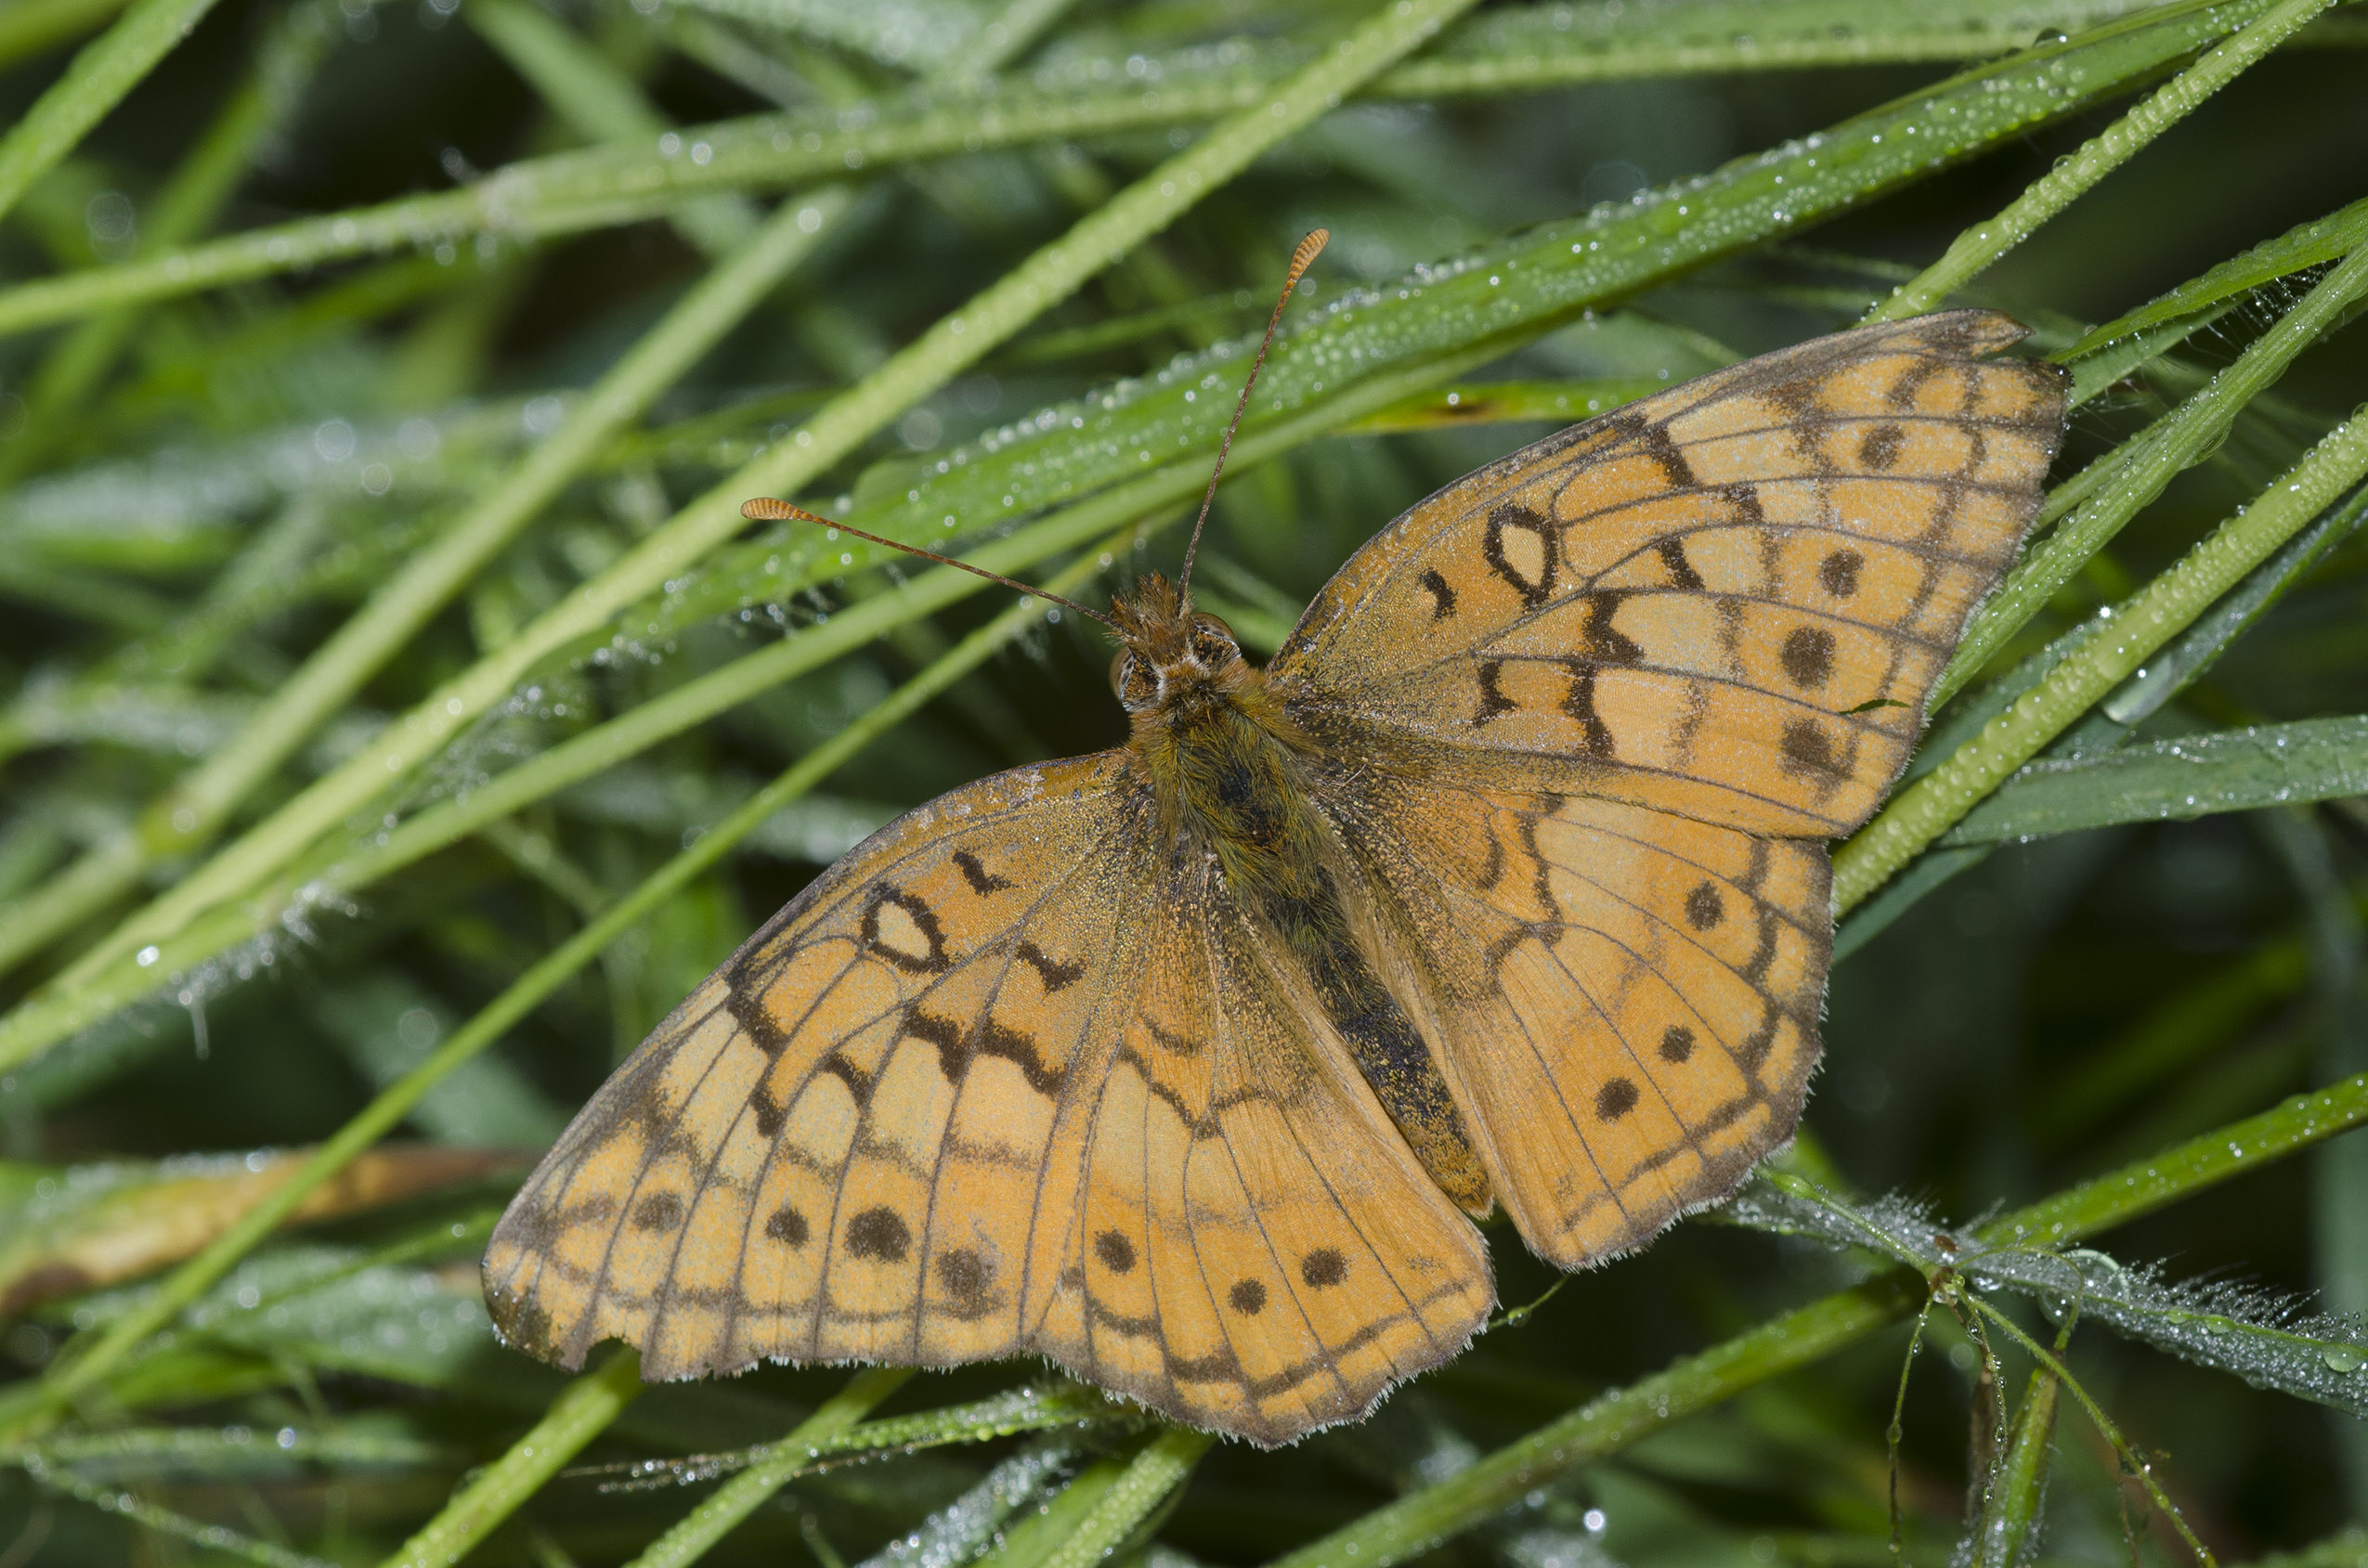 An orange butterfly with brown markings rests with it's wings spread on green grass